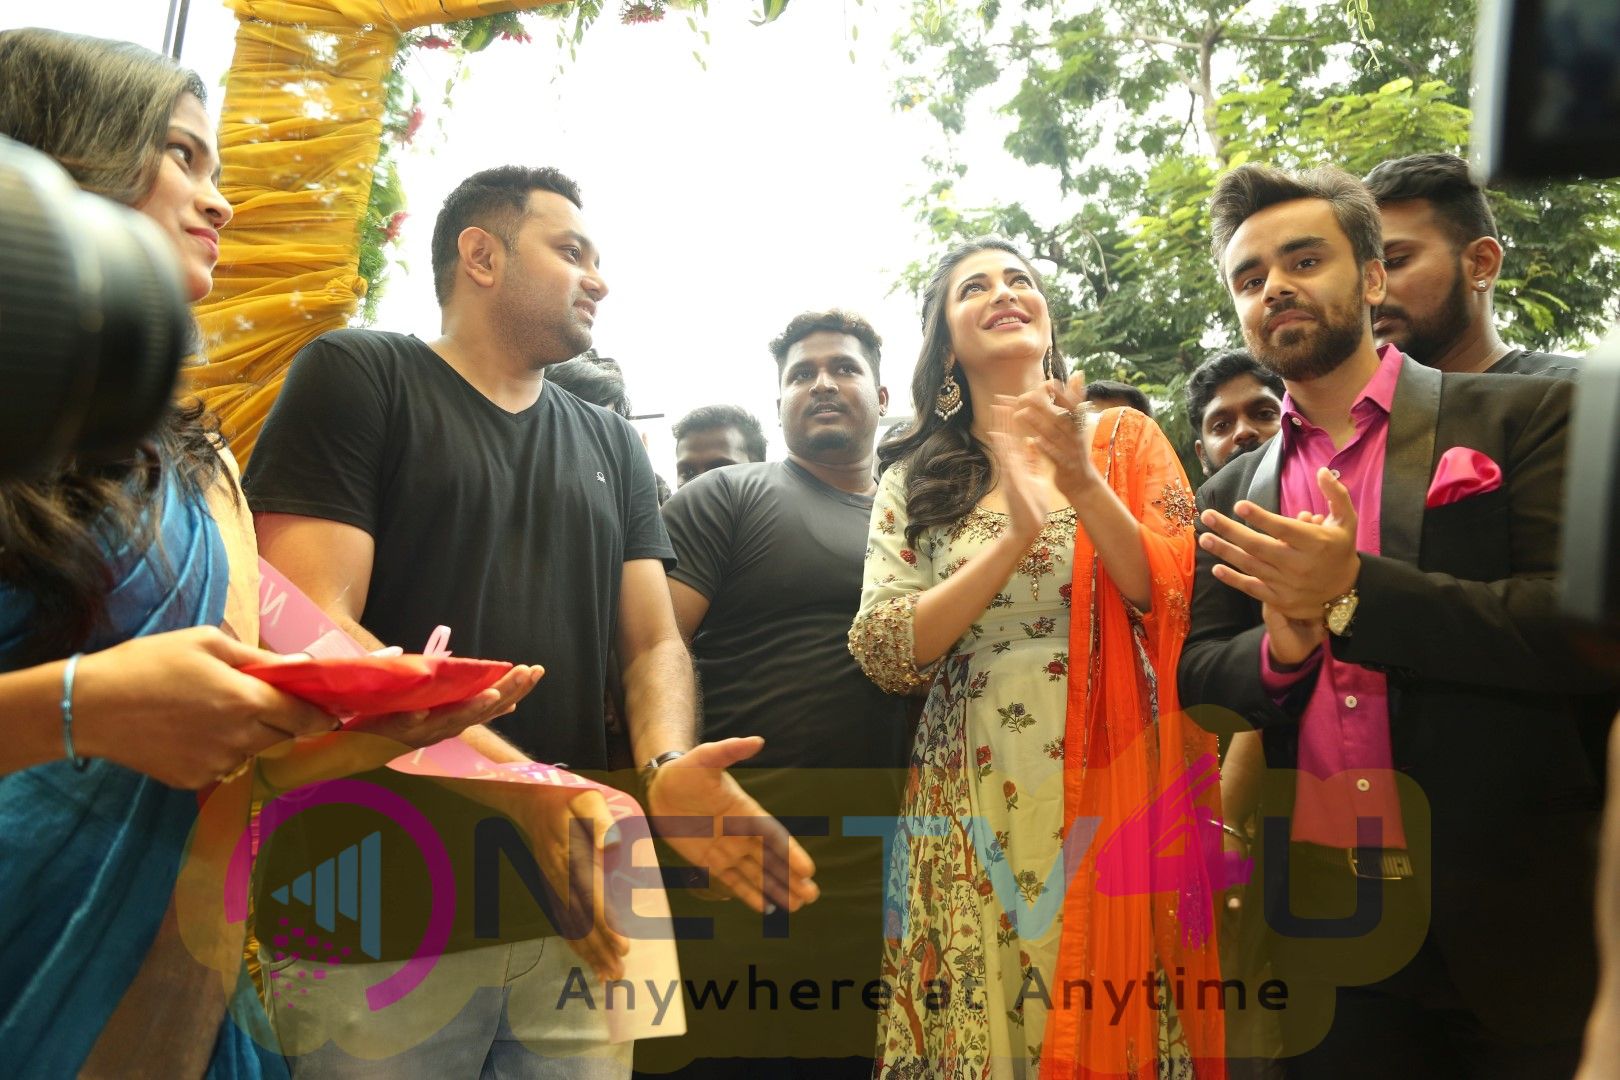 Actress Shruti Haasan Launches Nerru's The First Flagship Family Store In Chennai Stills Tamil Gallery